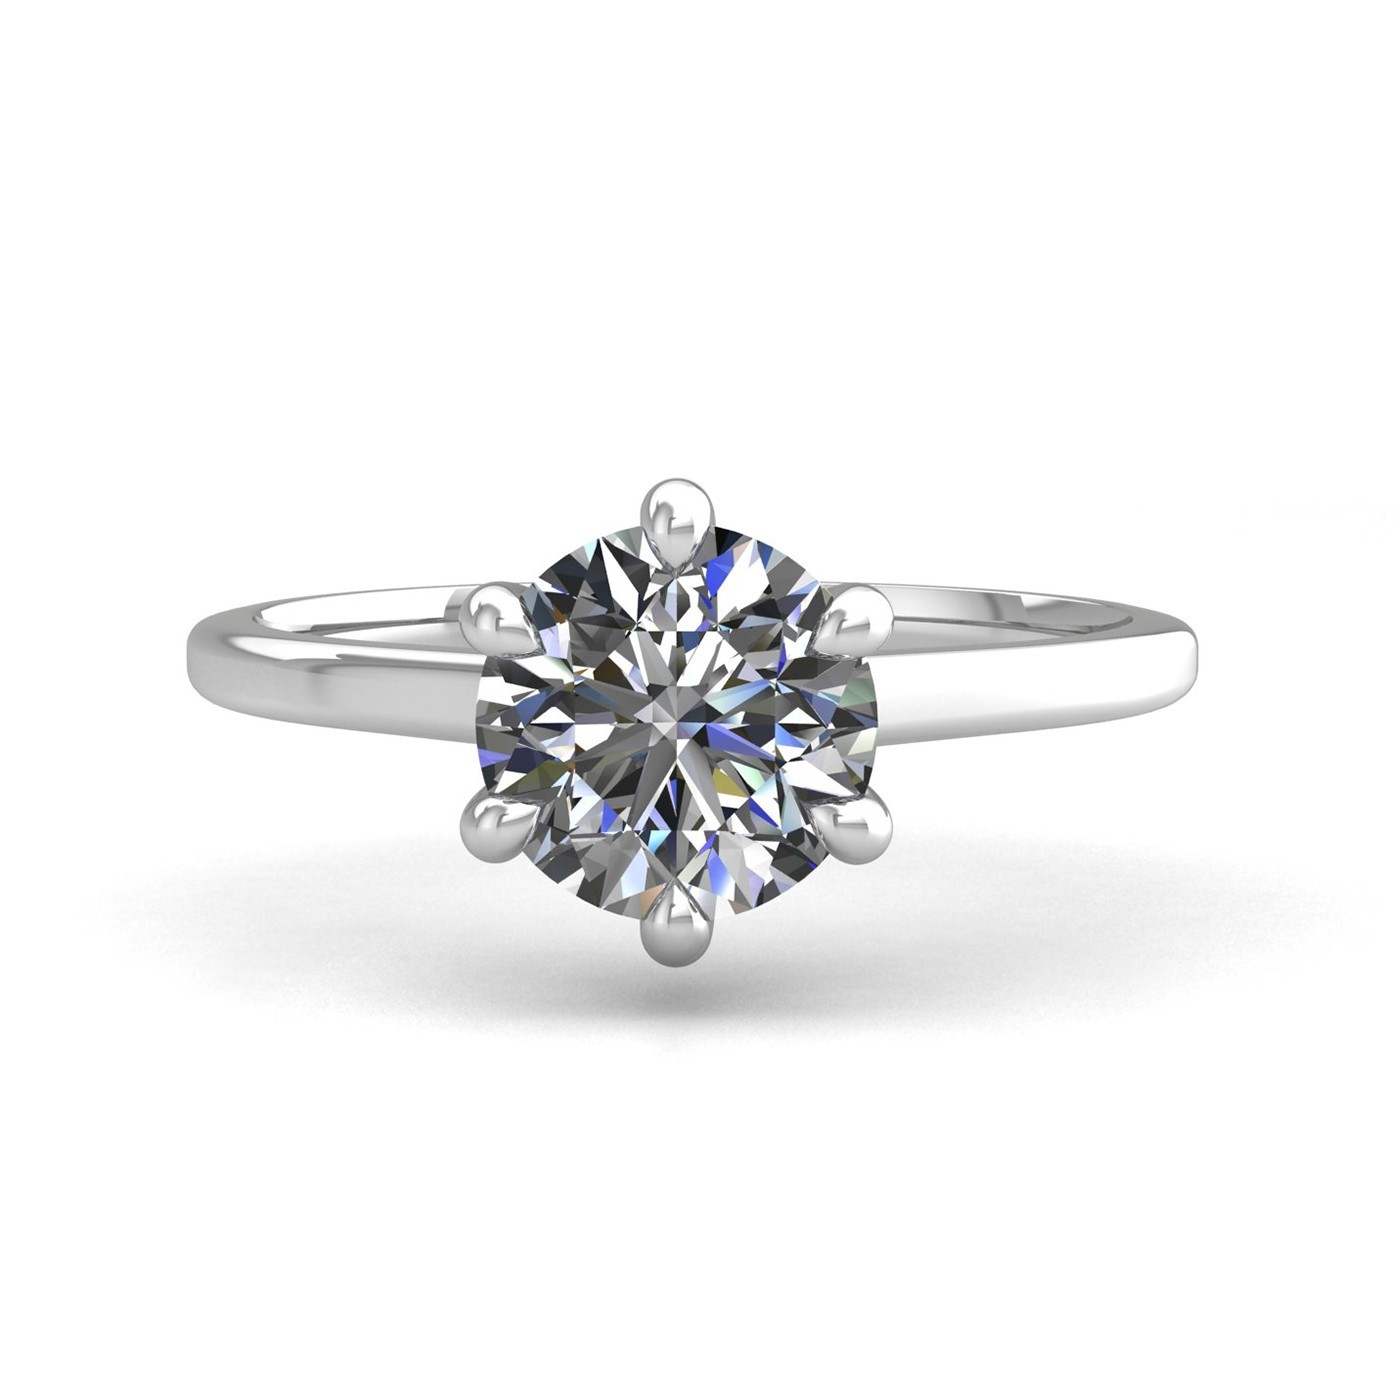 18k white gold 0,80 ct 6 prongs solitaire round cut diamond engagement ring with whisper thin band Photos & images